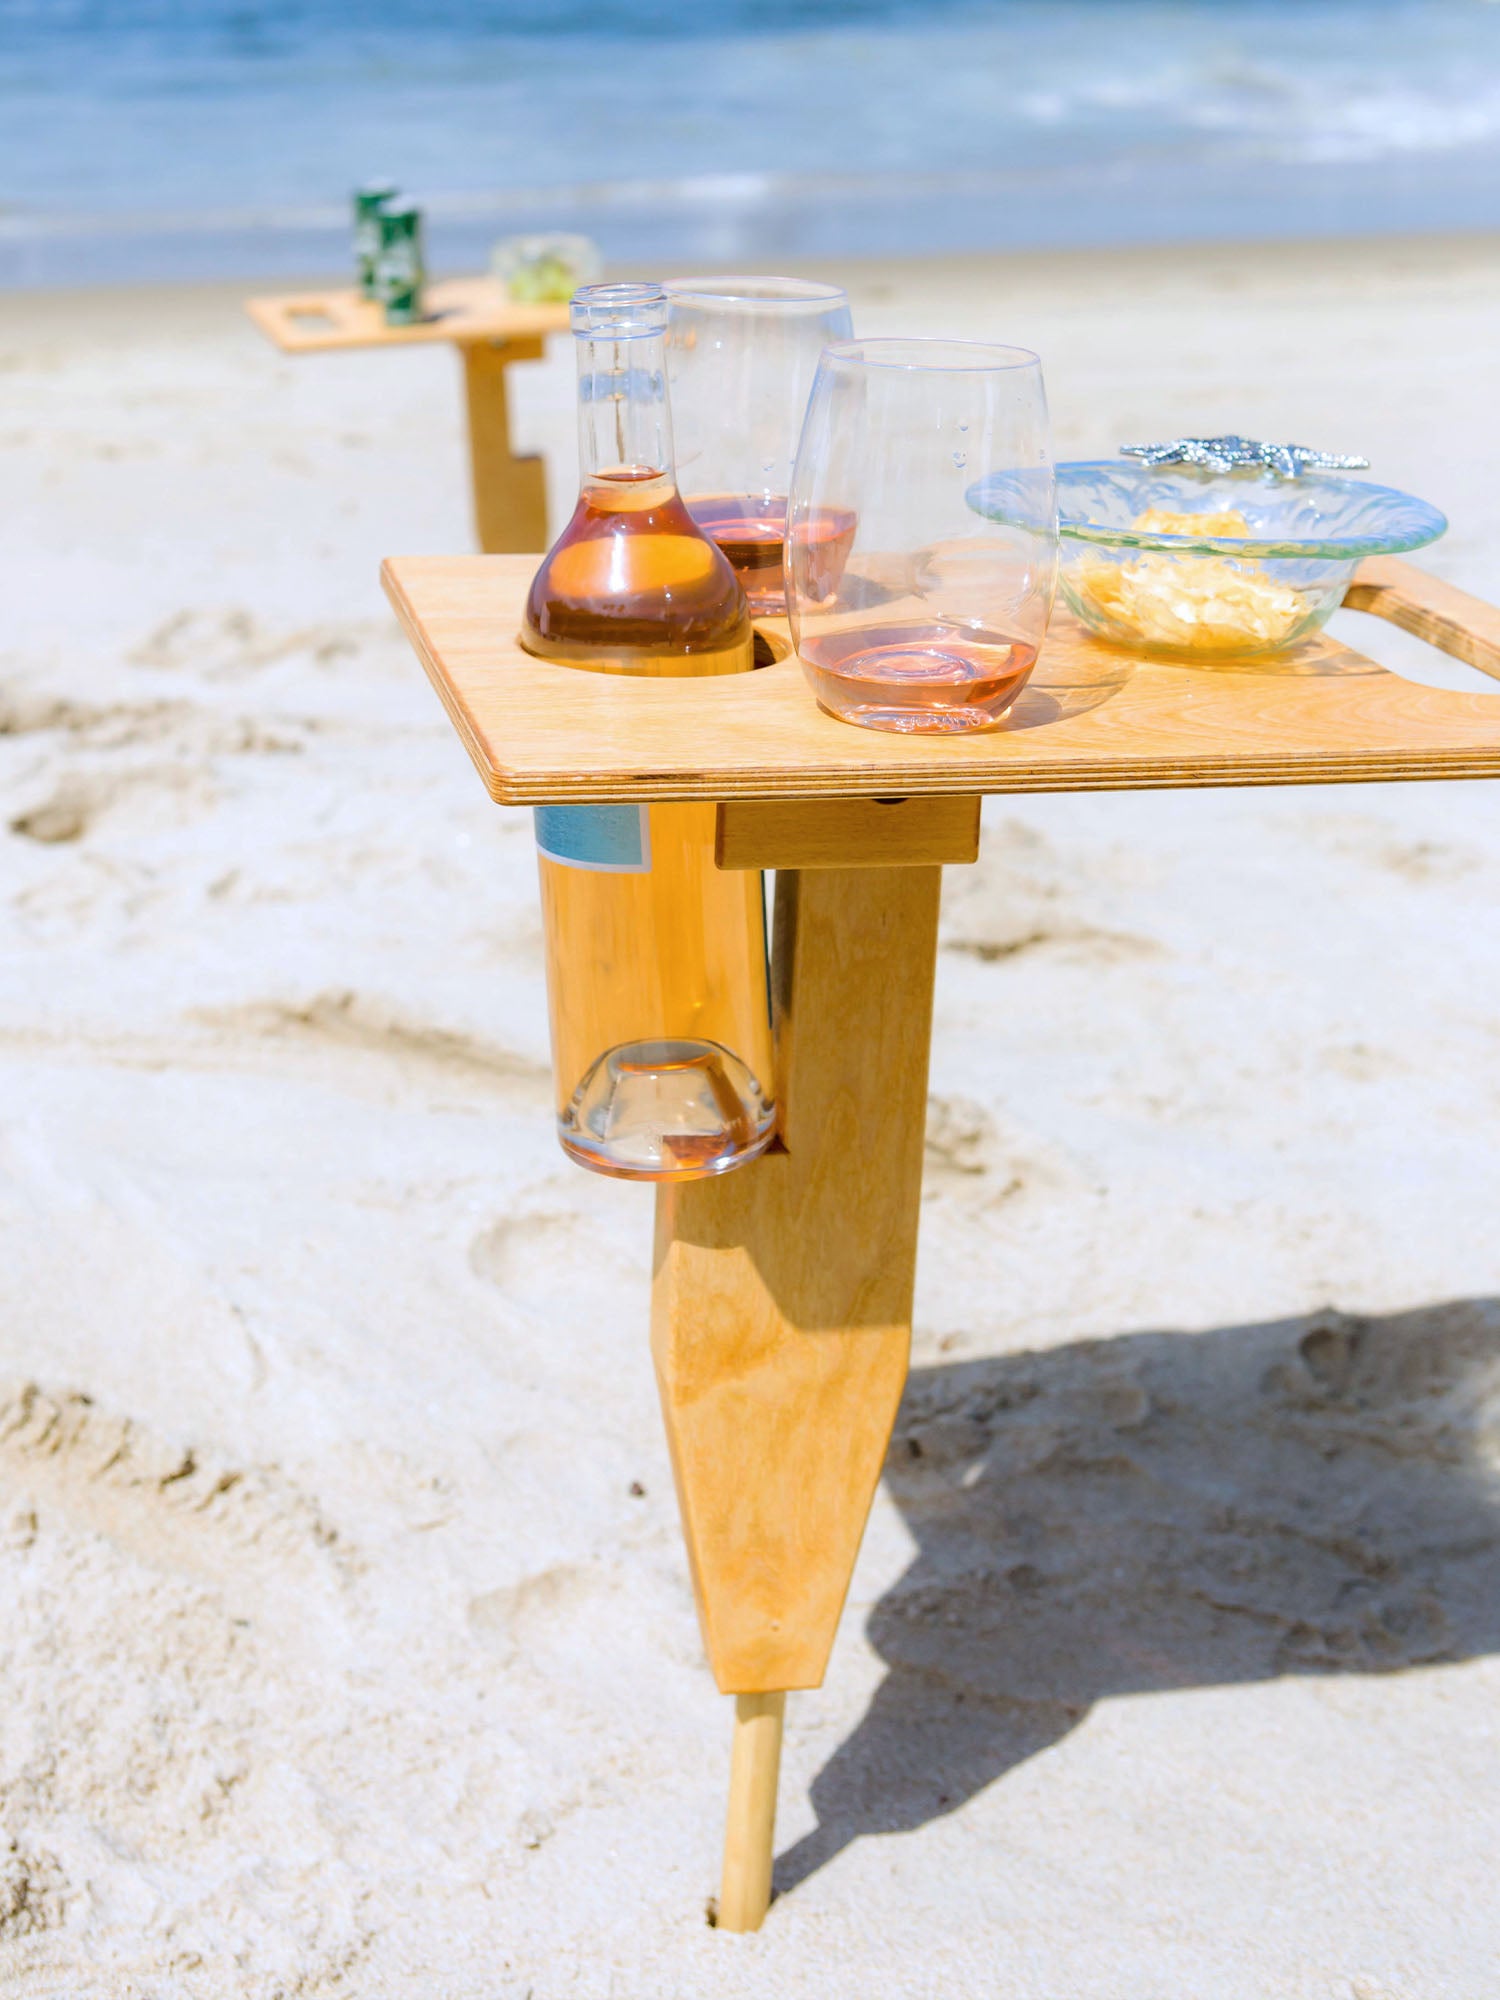 Esplanade portable beach table in naturally sunkissed color unfolded standing up in sand at beach with refreshment drinks and food